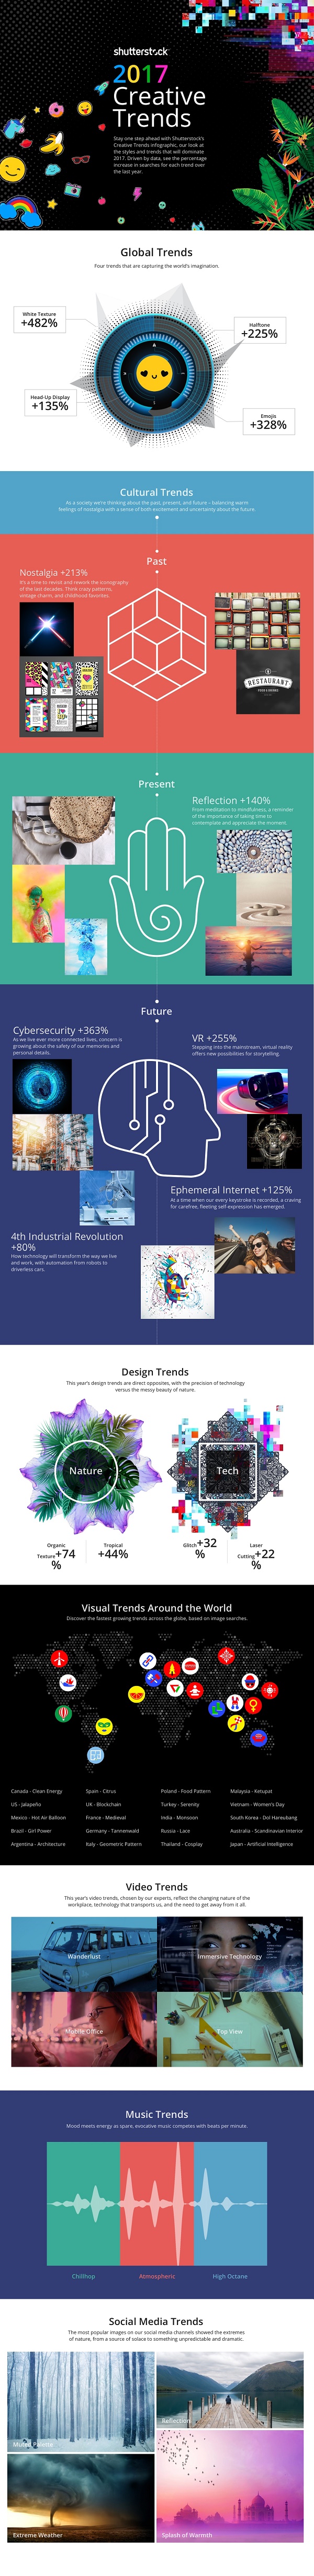 Explore Shutterstock’s Global Creative Trends That Will Shape 2017